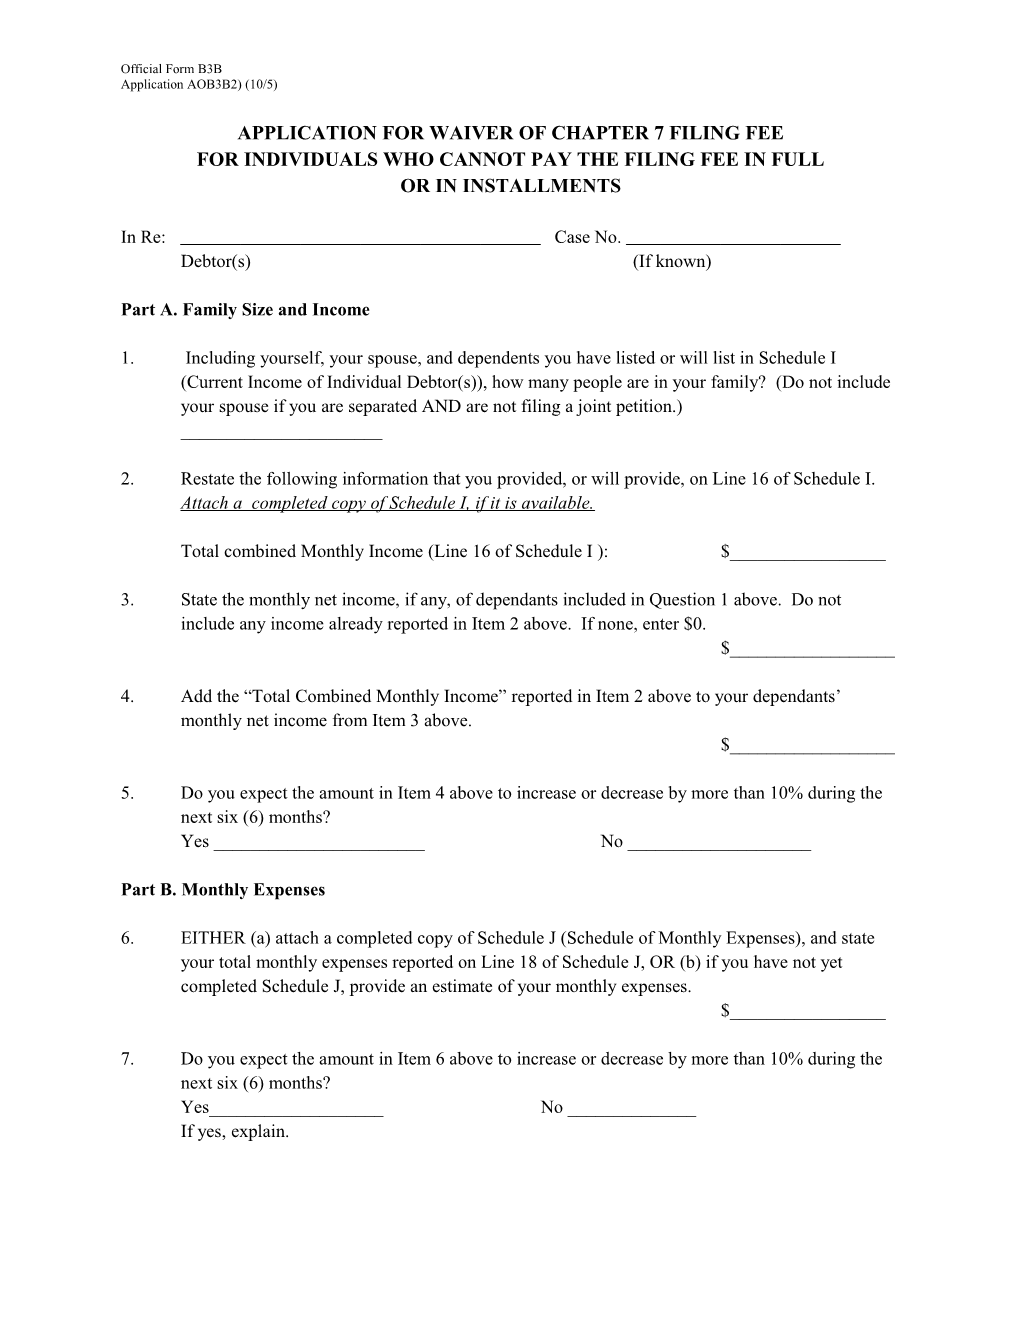 AOB3B2 Application for Waiver of Chapter 7 Filing Fee for Individuals Who Cannot Pay The